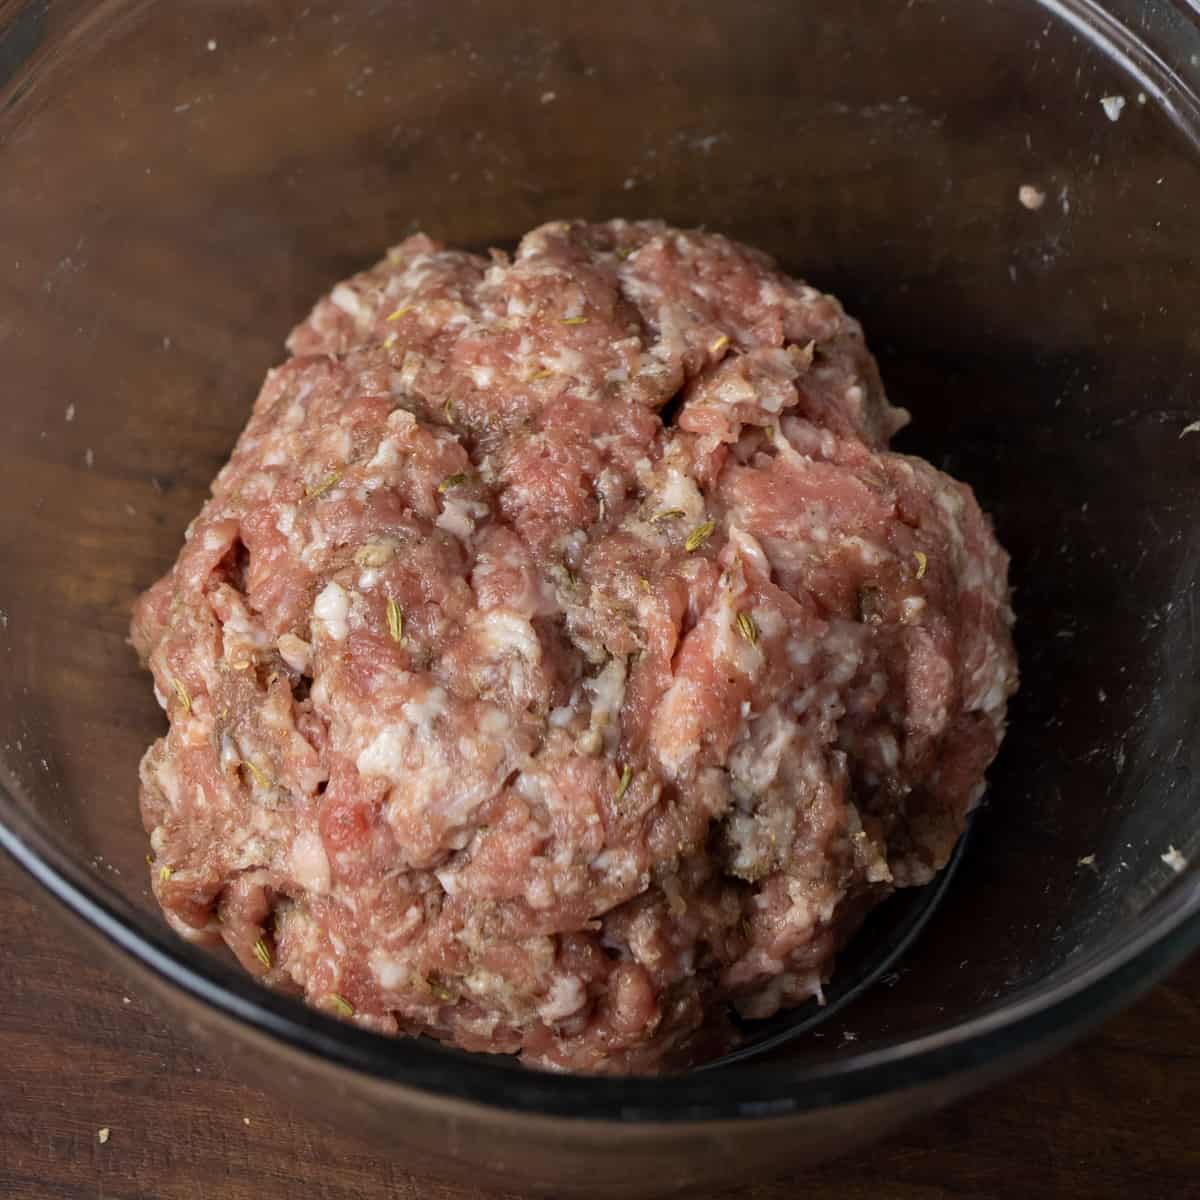 Raw sausage meat in a glass mixing bowl.